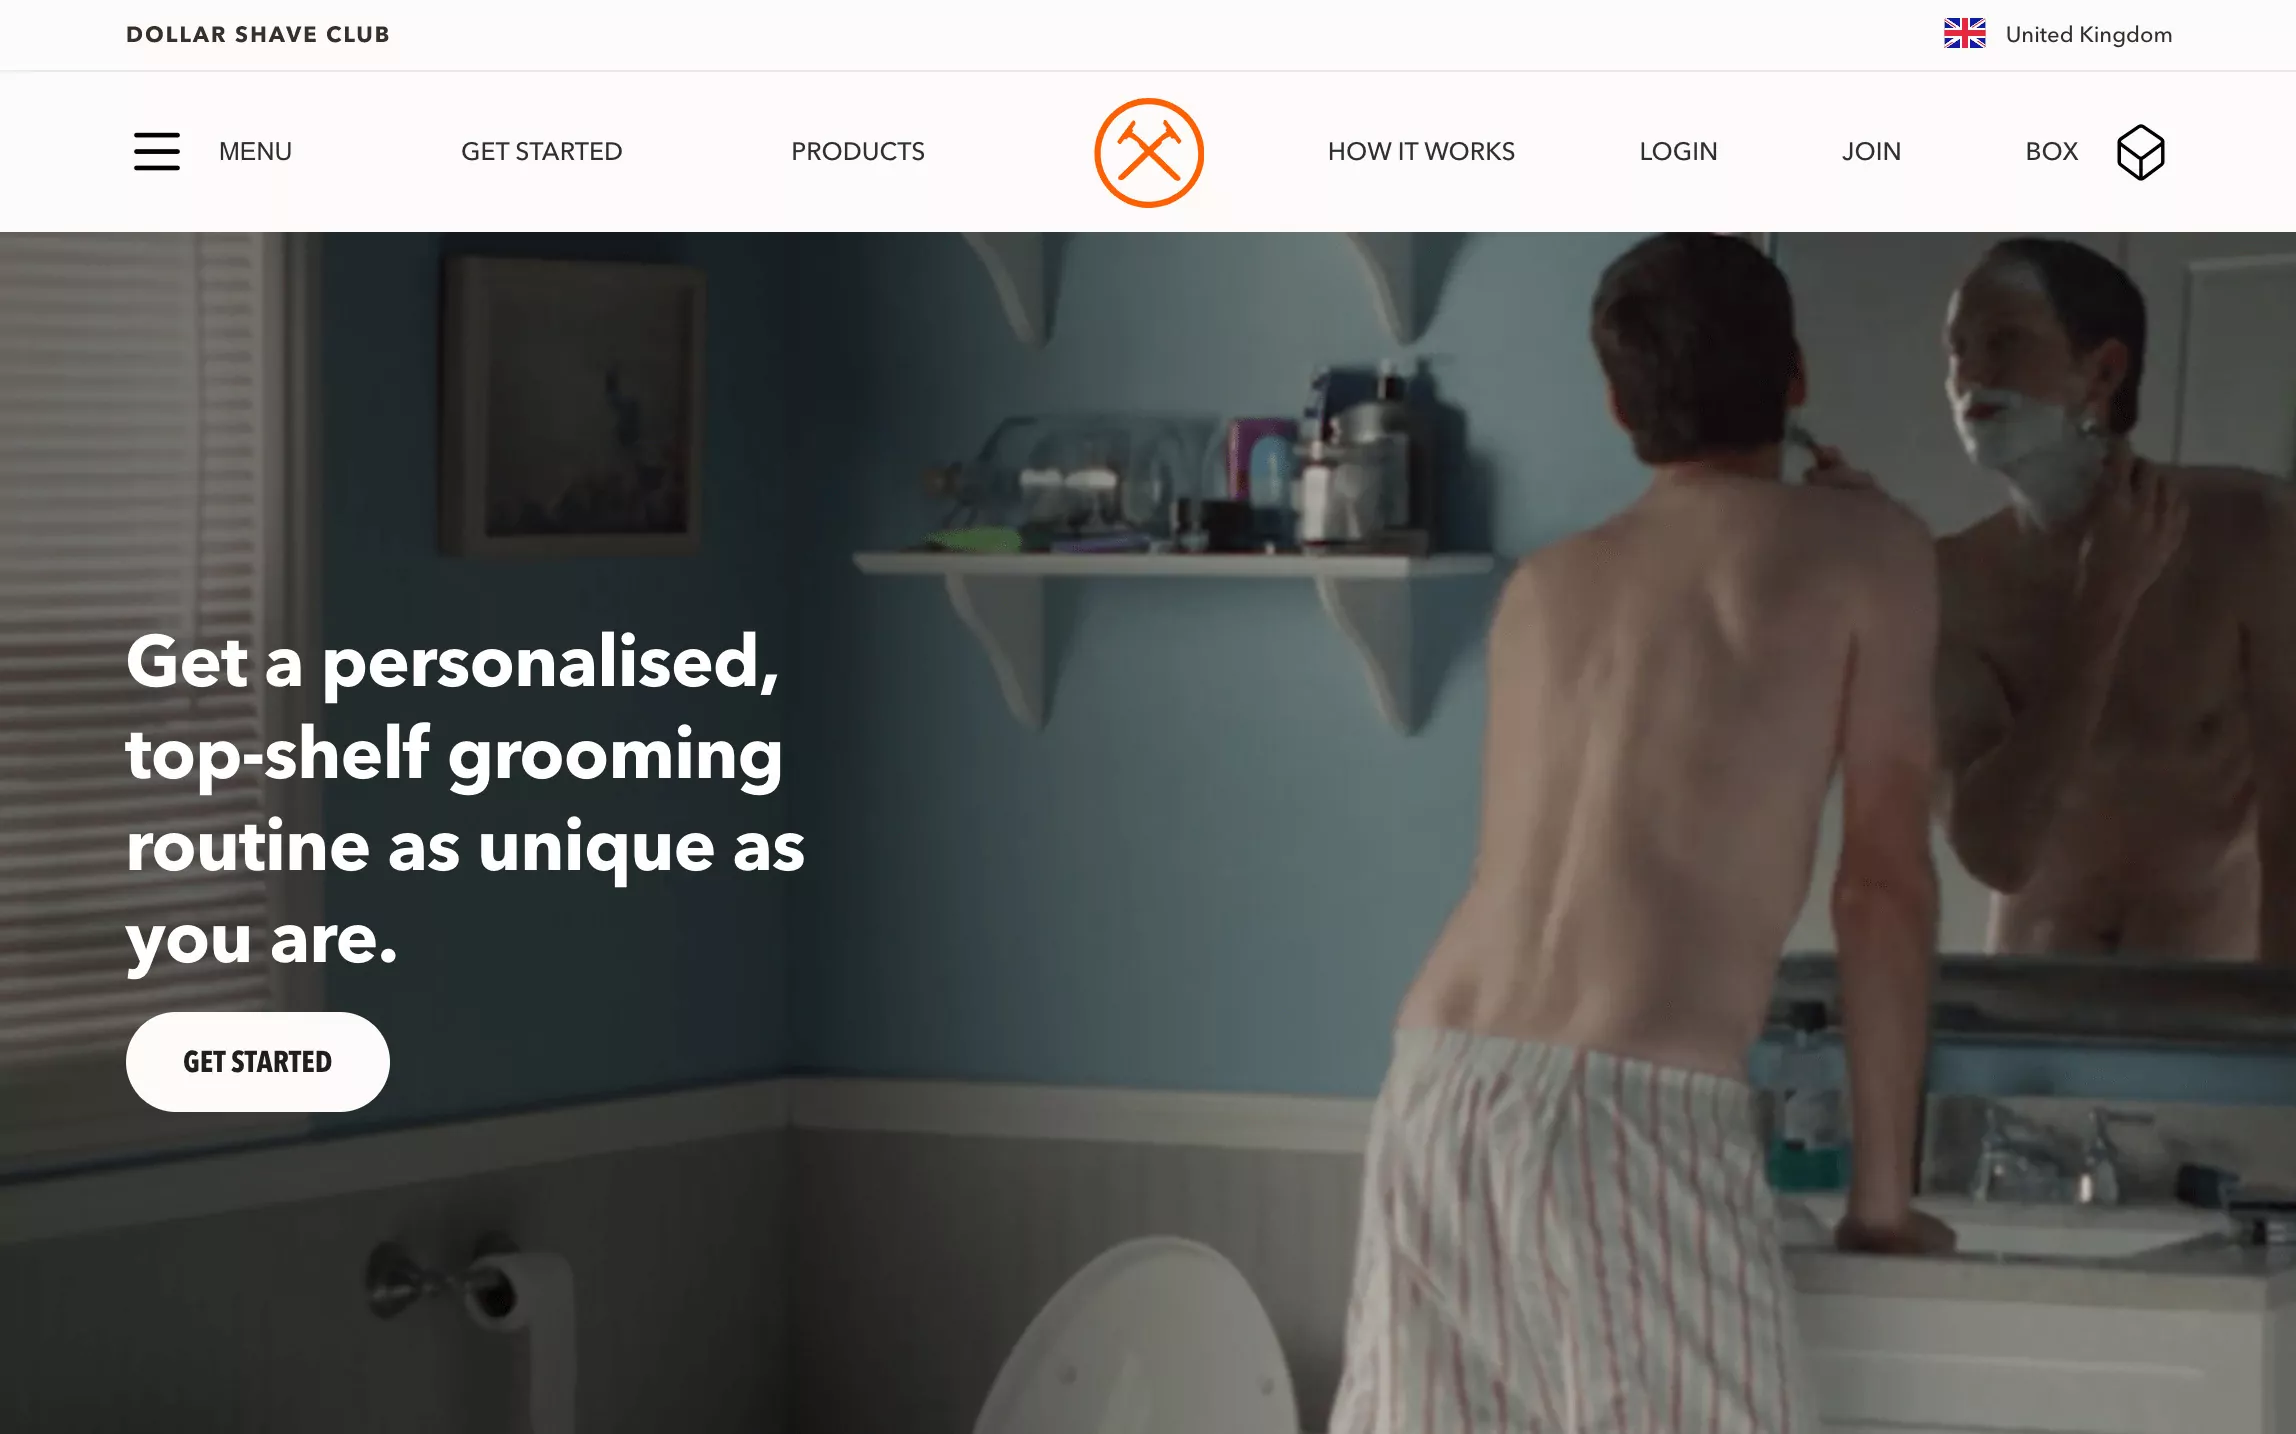 Dollar shave club is a good example of a subscription website